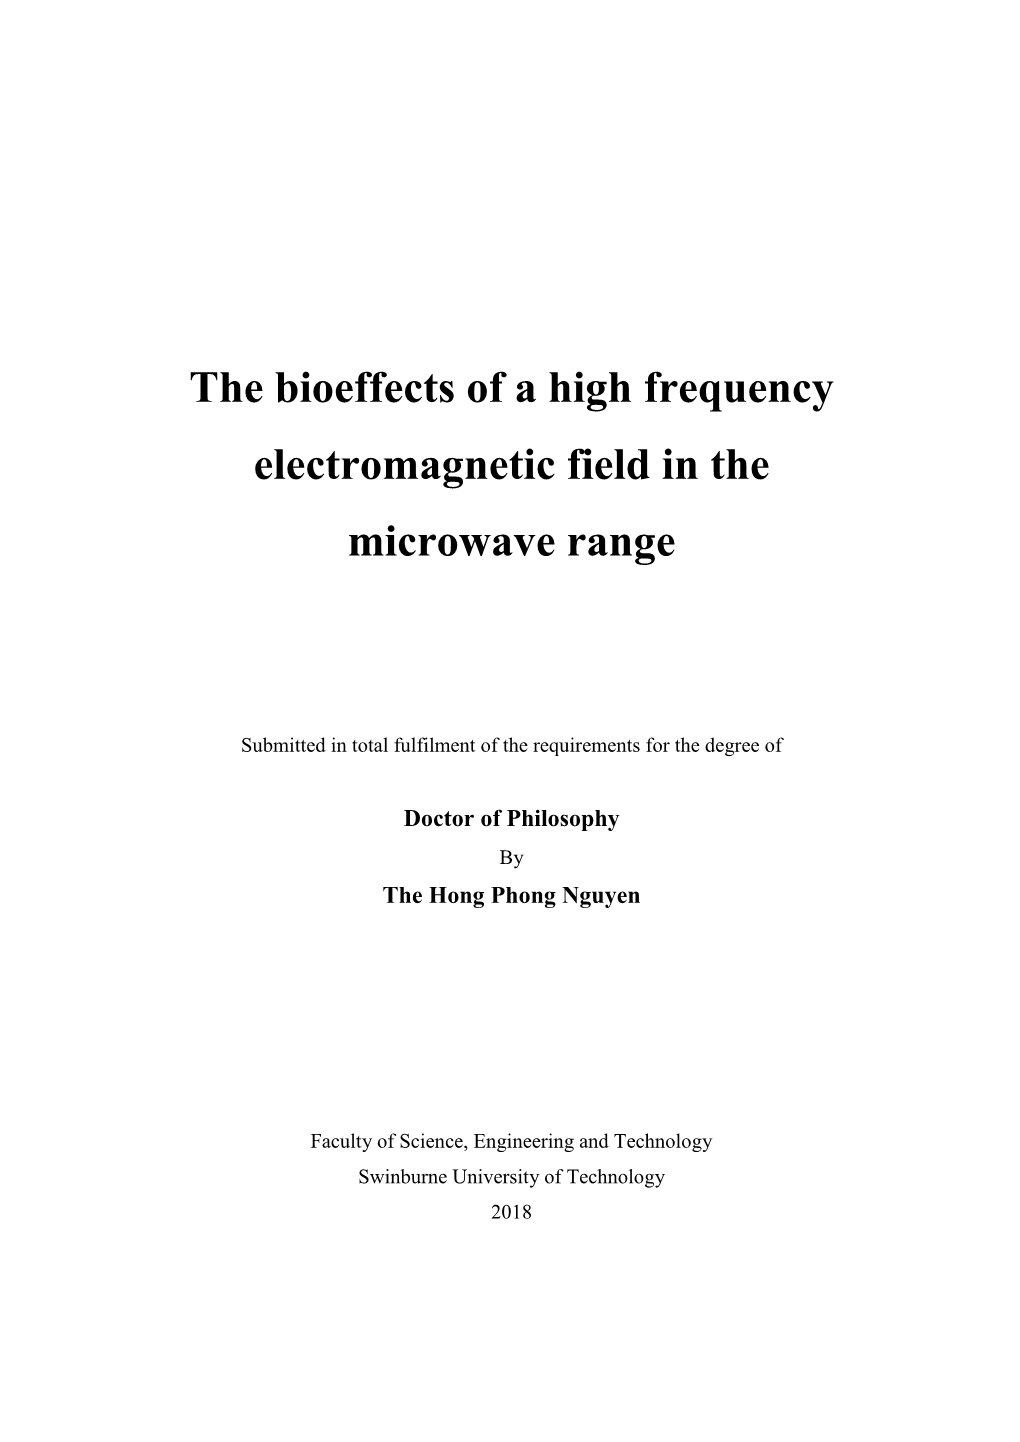 The Bioeffects of a High Frequency Electromagnetic Field in the Microwave Range